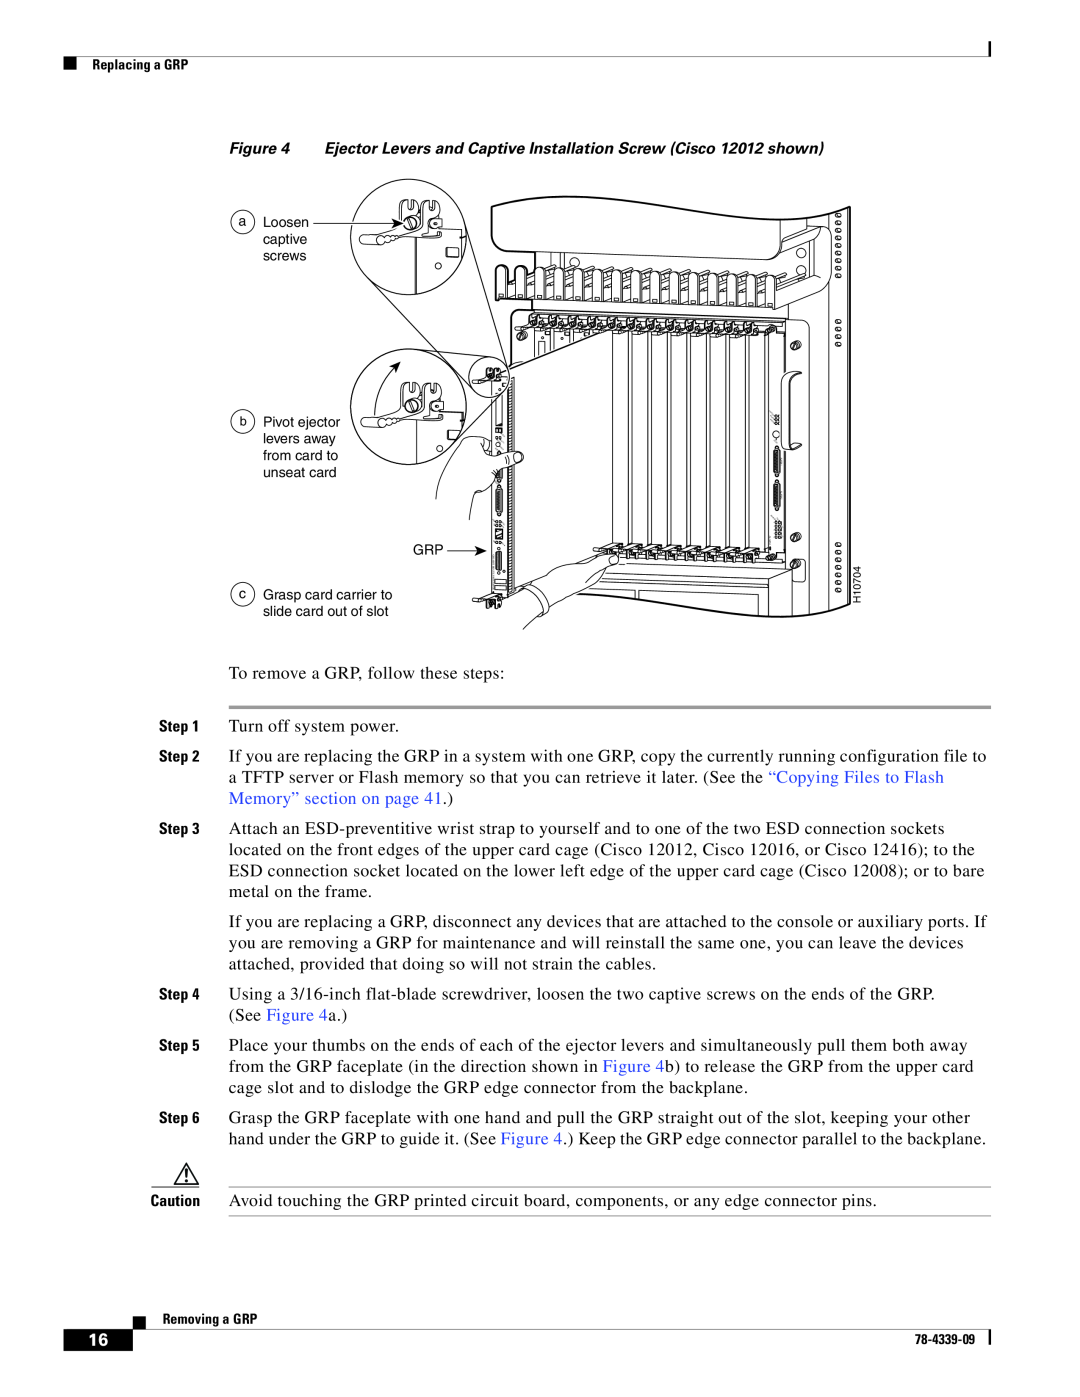 Cisco Systems GRP-B manual Replacing a GRP, a Loosen captive screws, Pivot ejector, levers away, from card to, unseat card 